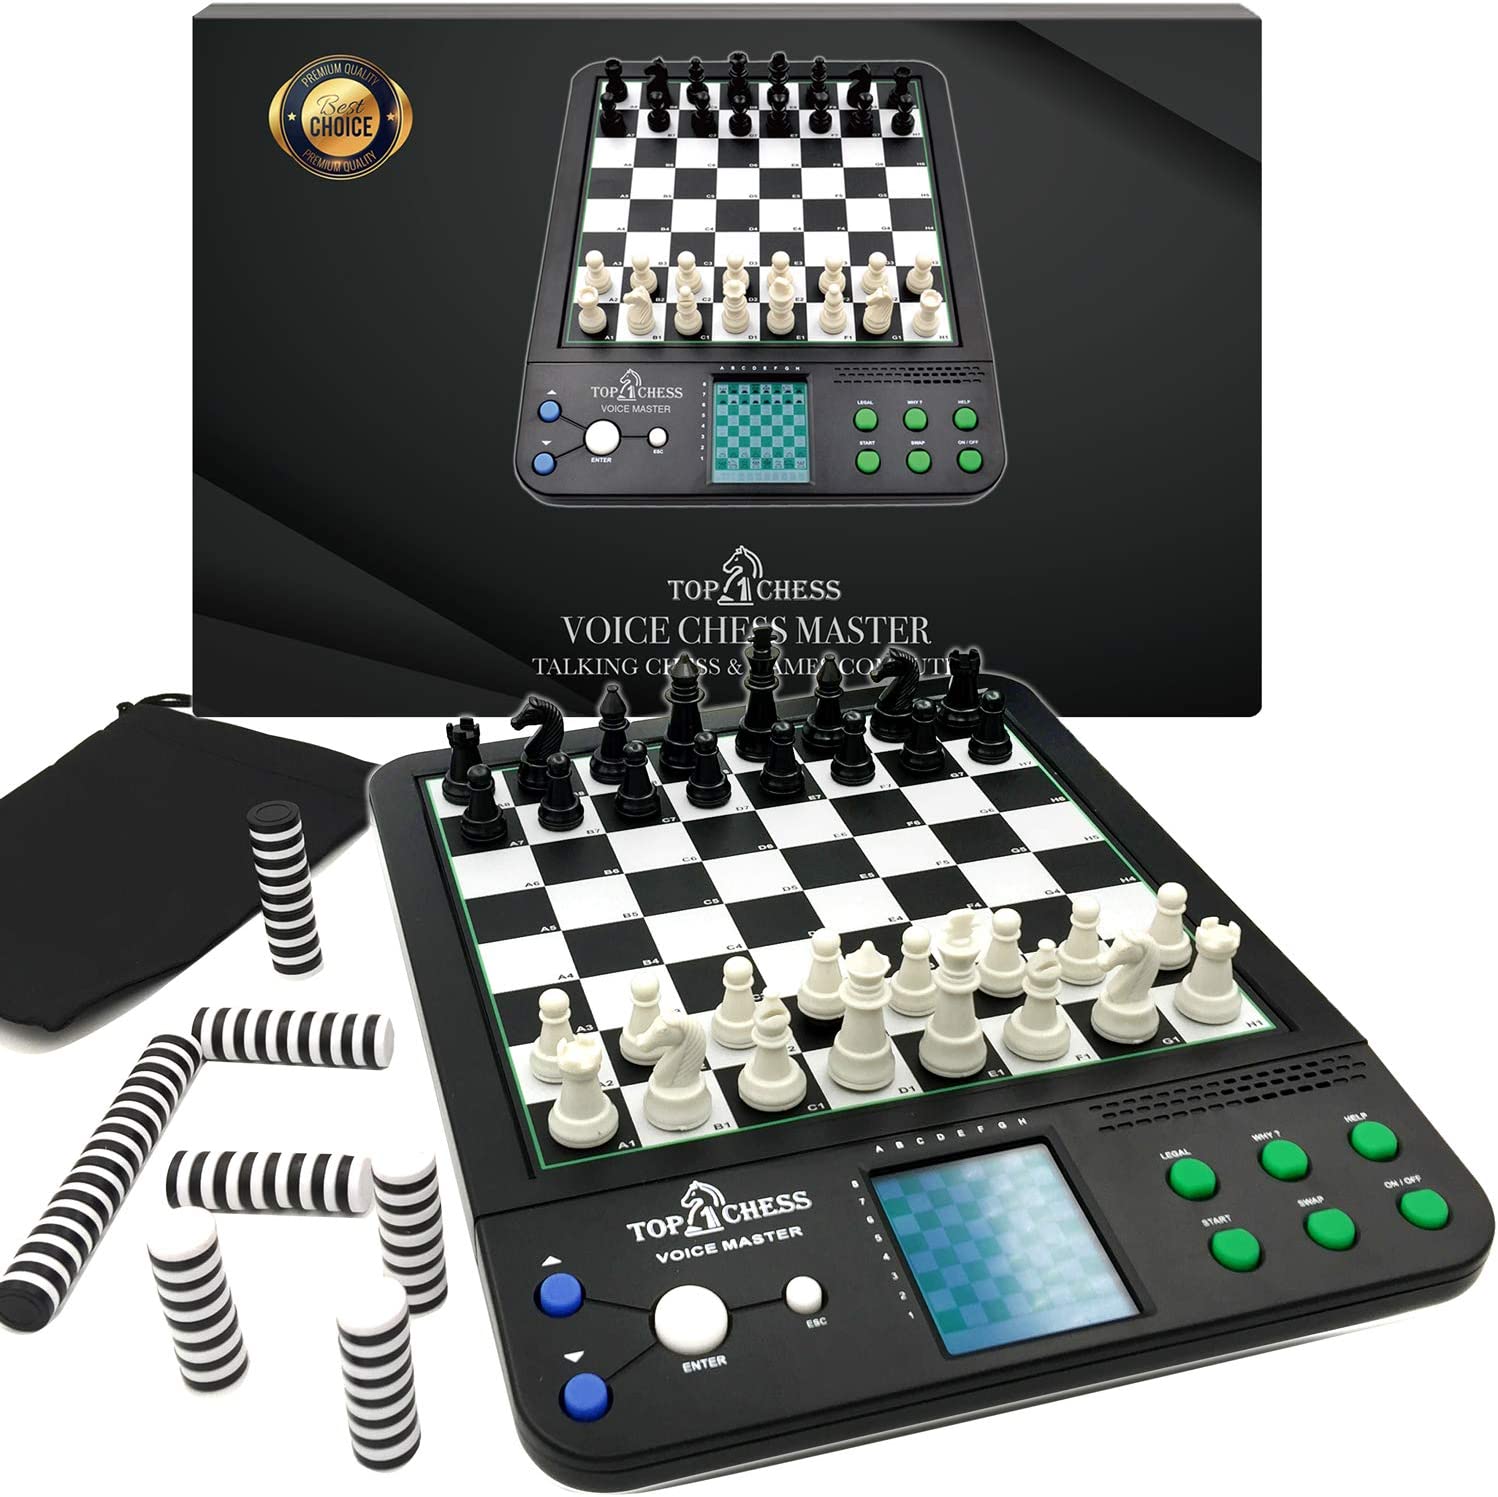 Top 1 Chess Electronic Chess Set | Chess Sets for Adults | Chess Set for  Kids | Voice Chess Computer Teaching System | Chess Strategy Beginners